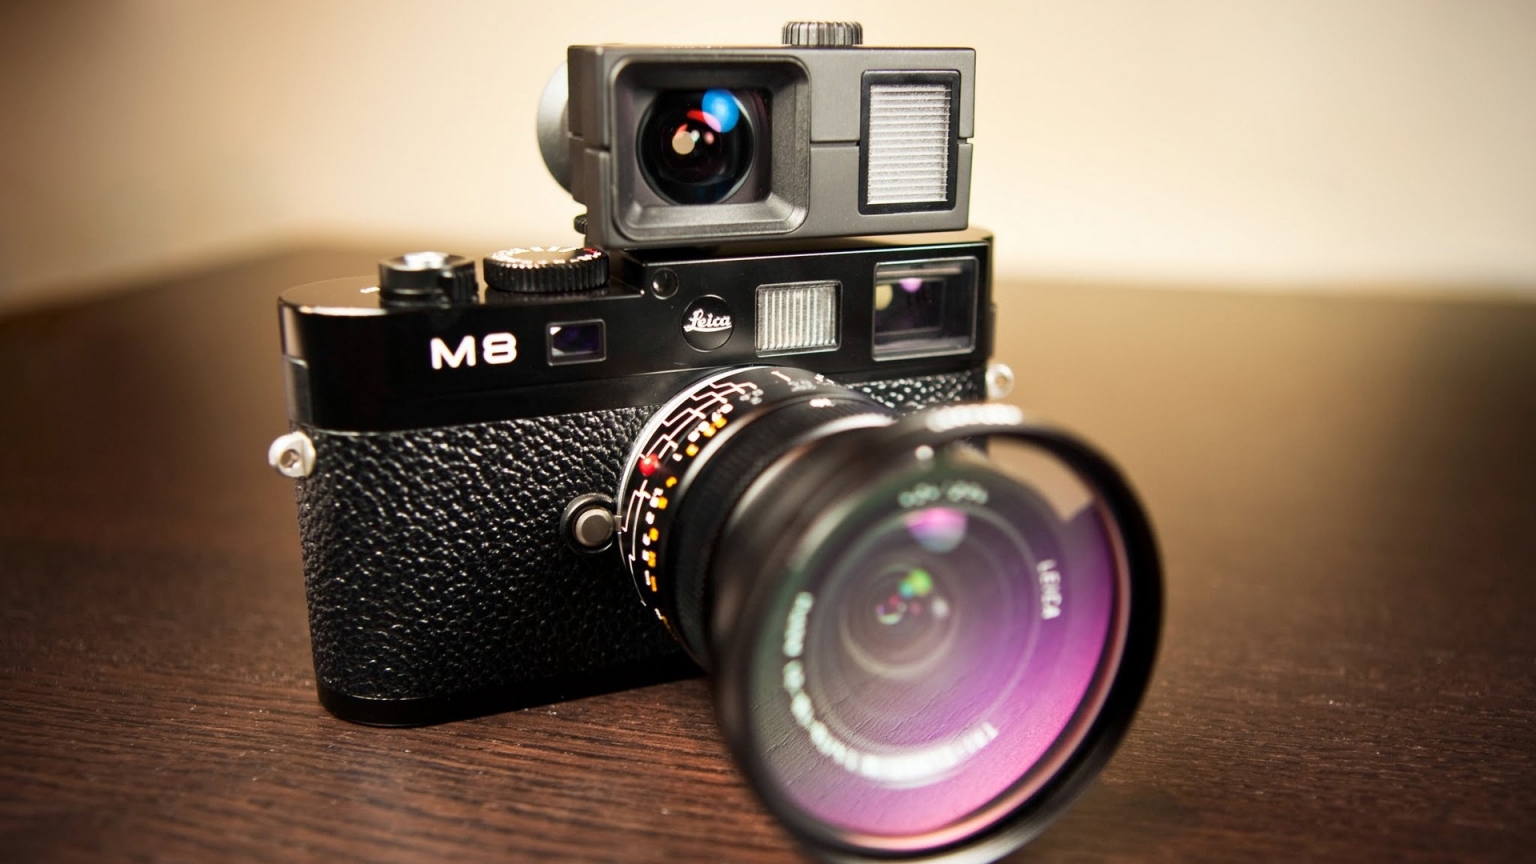 Leica M8 for 1536 x 864 HDTV resolution